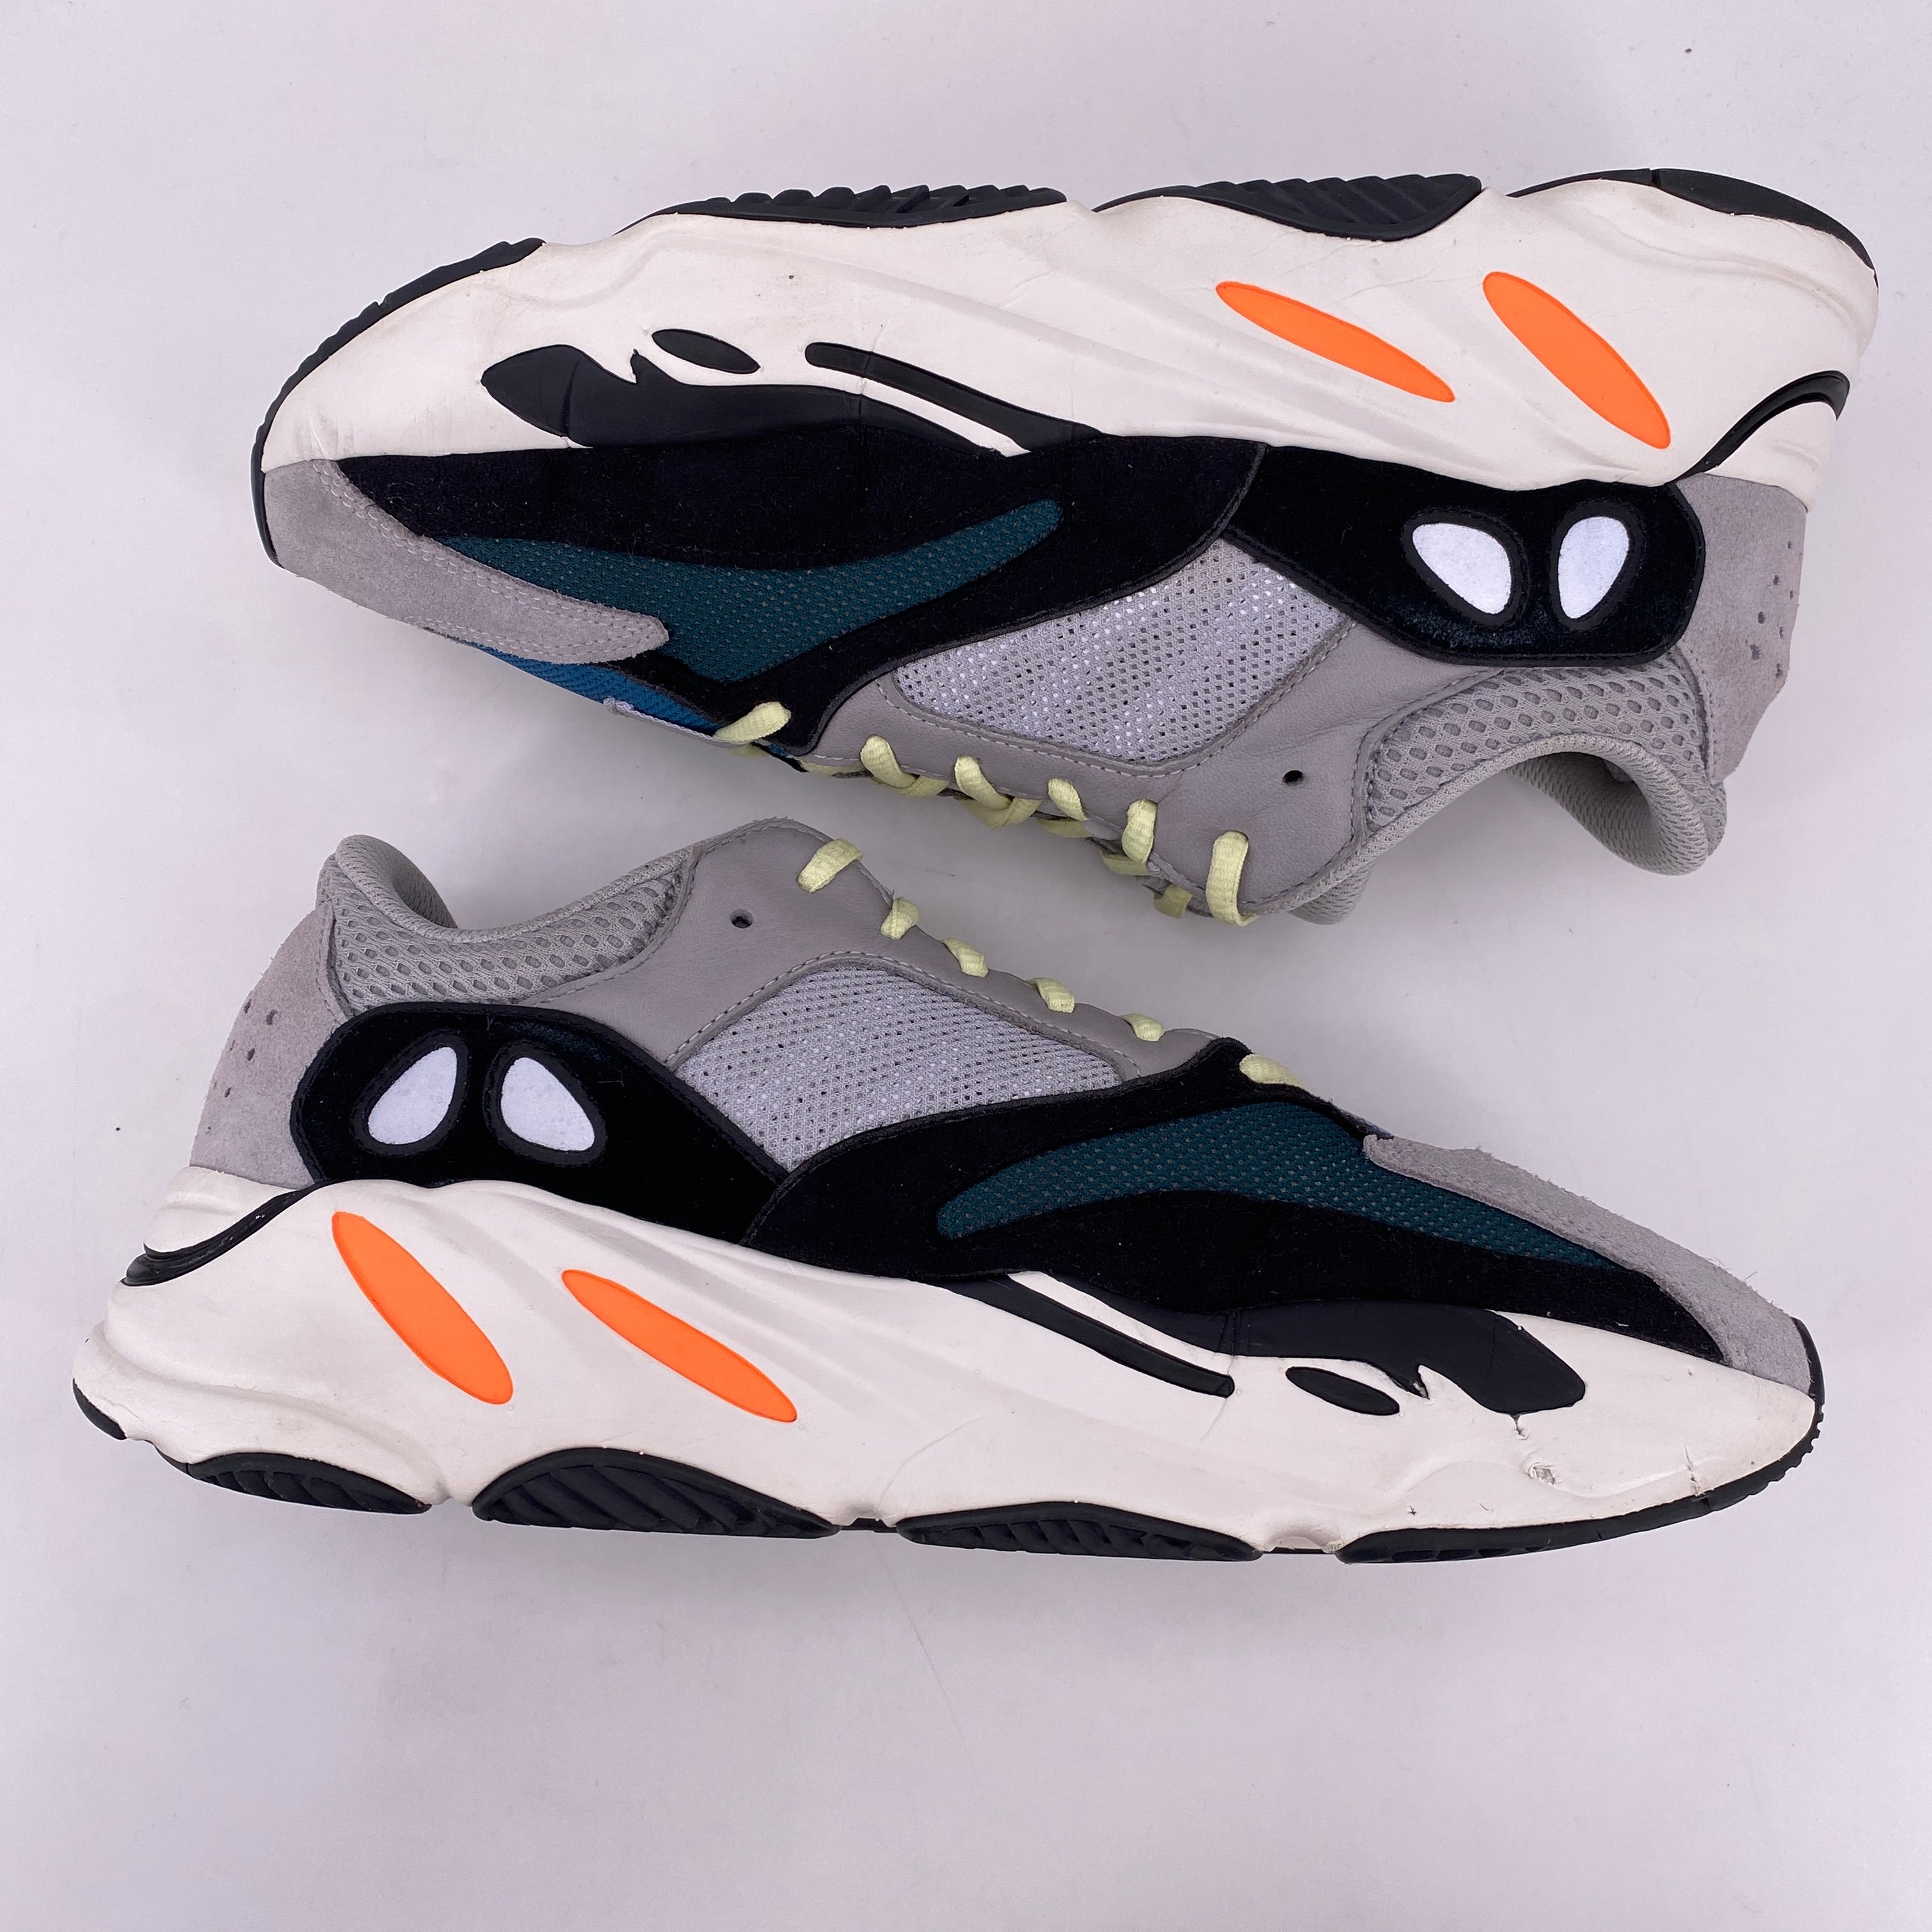 Yeezy 700 &quot;Waverunner&quot; 2018 Used Size 11